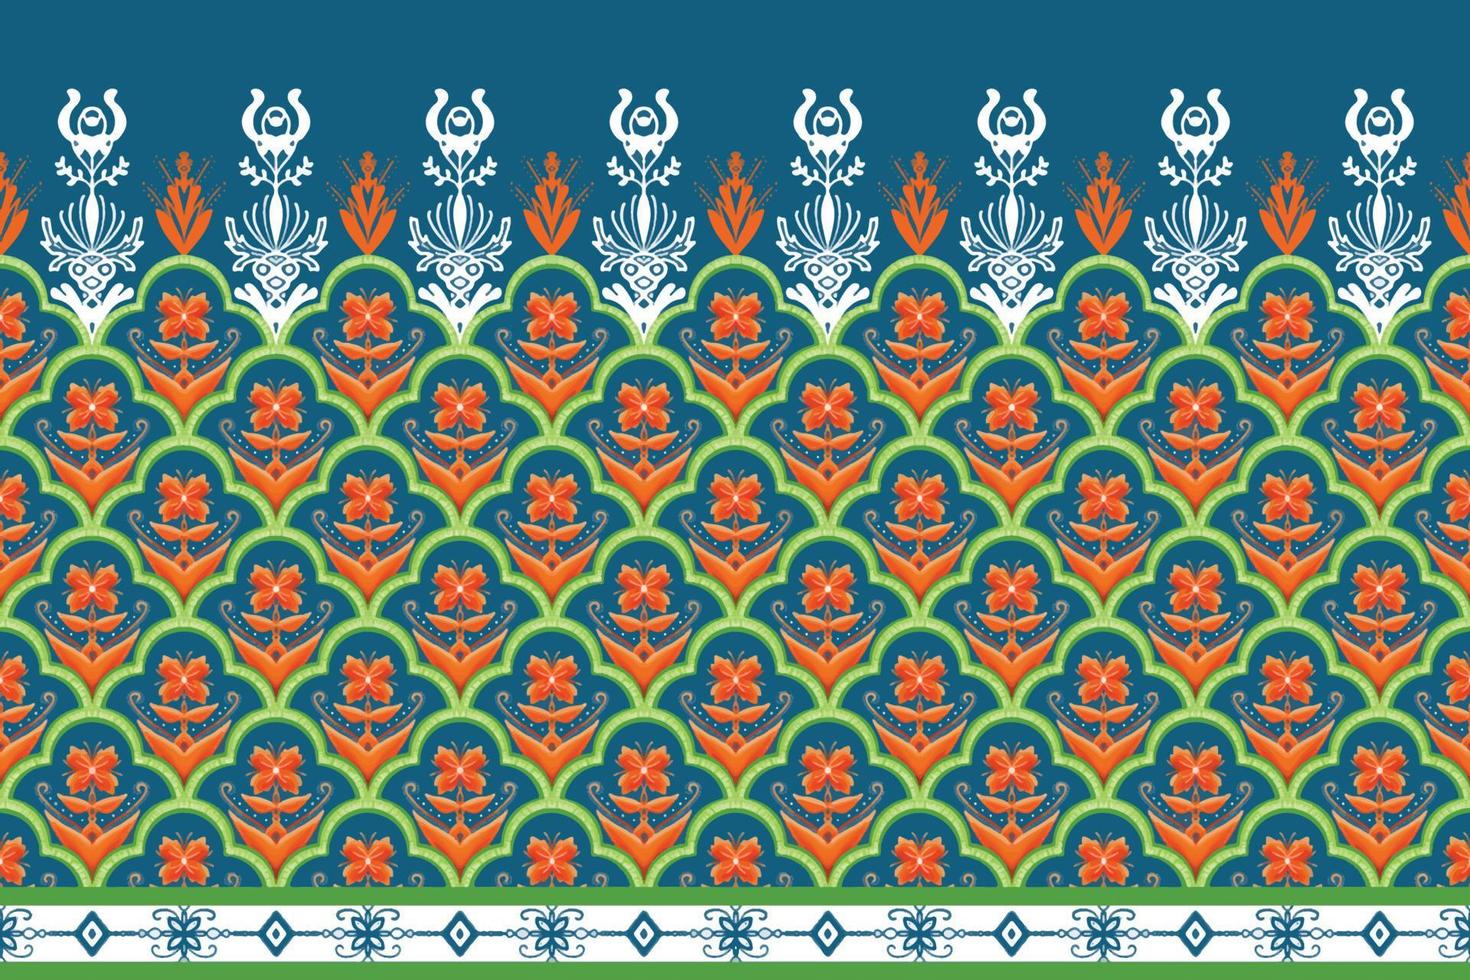 Orange Flower on Indigo Blue, Green Geometric ethnic oriental pattern traditional Design for background,carpet,wallpaper,clothing,wrapping,Batik,fabric, vector illustration embroidery style